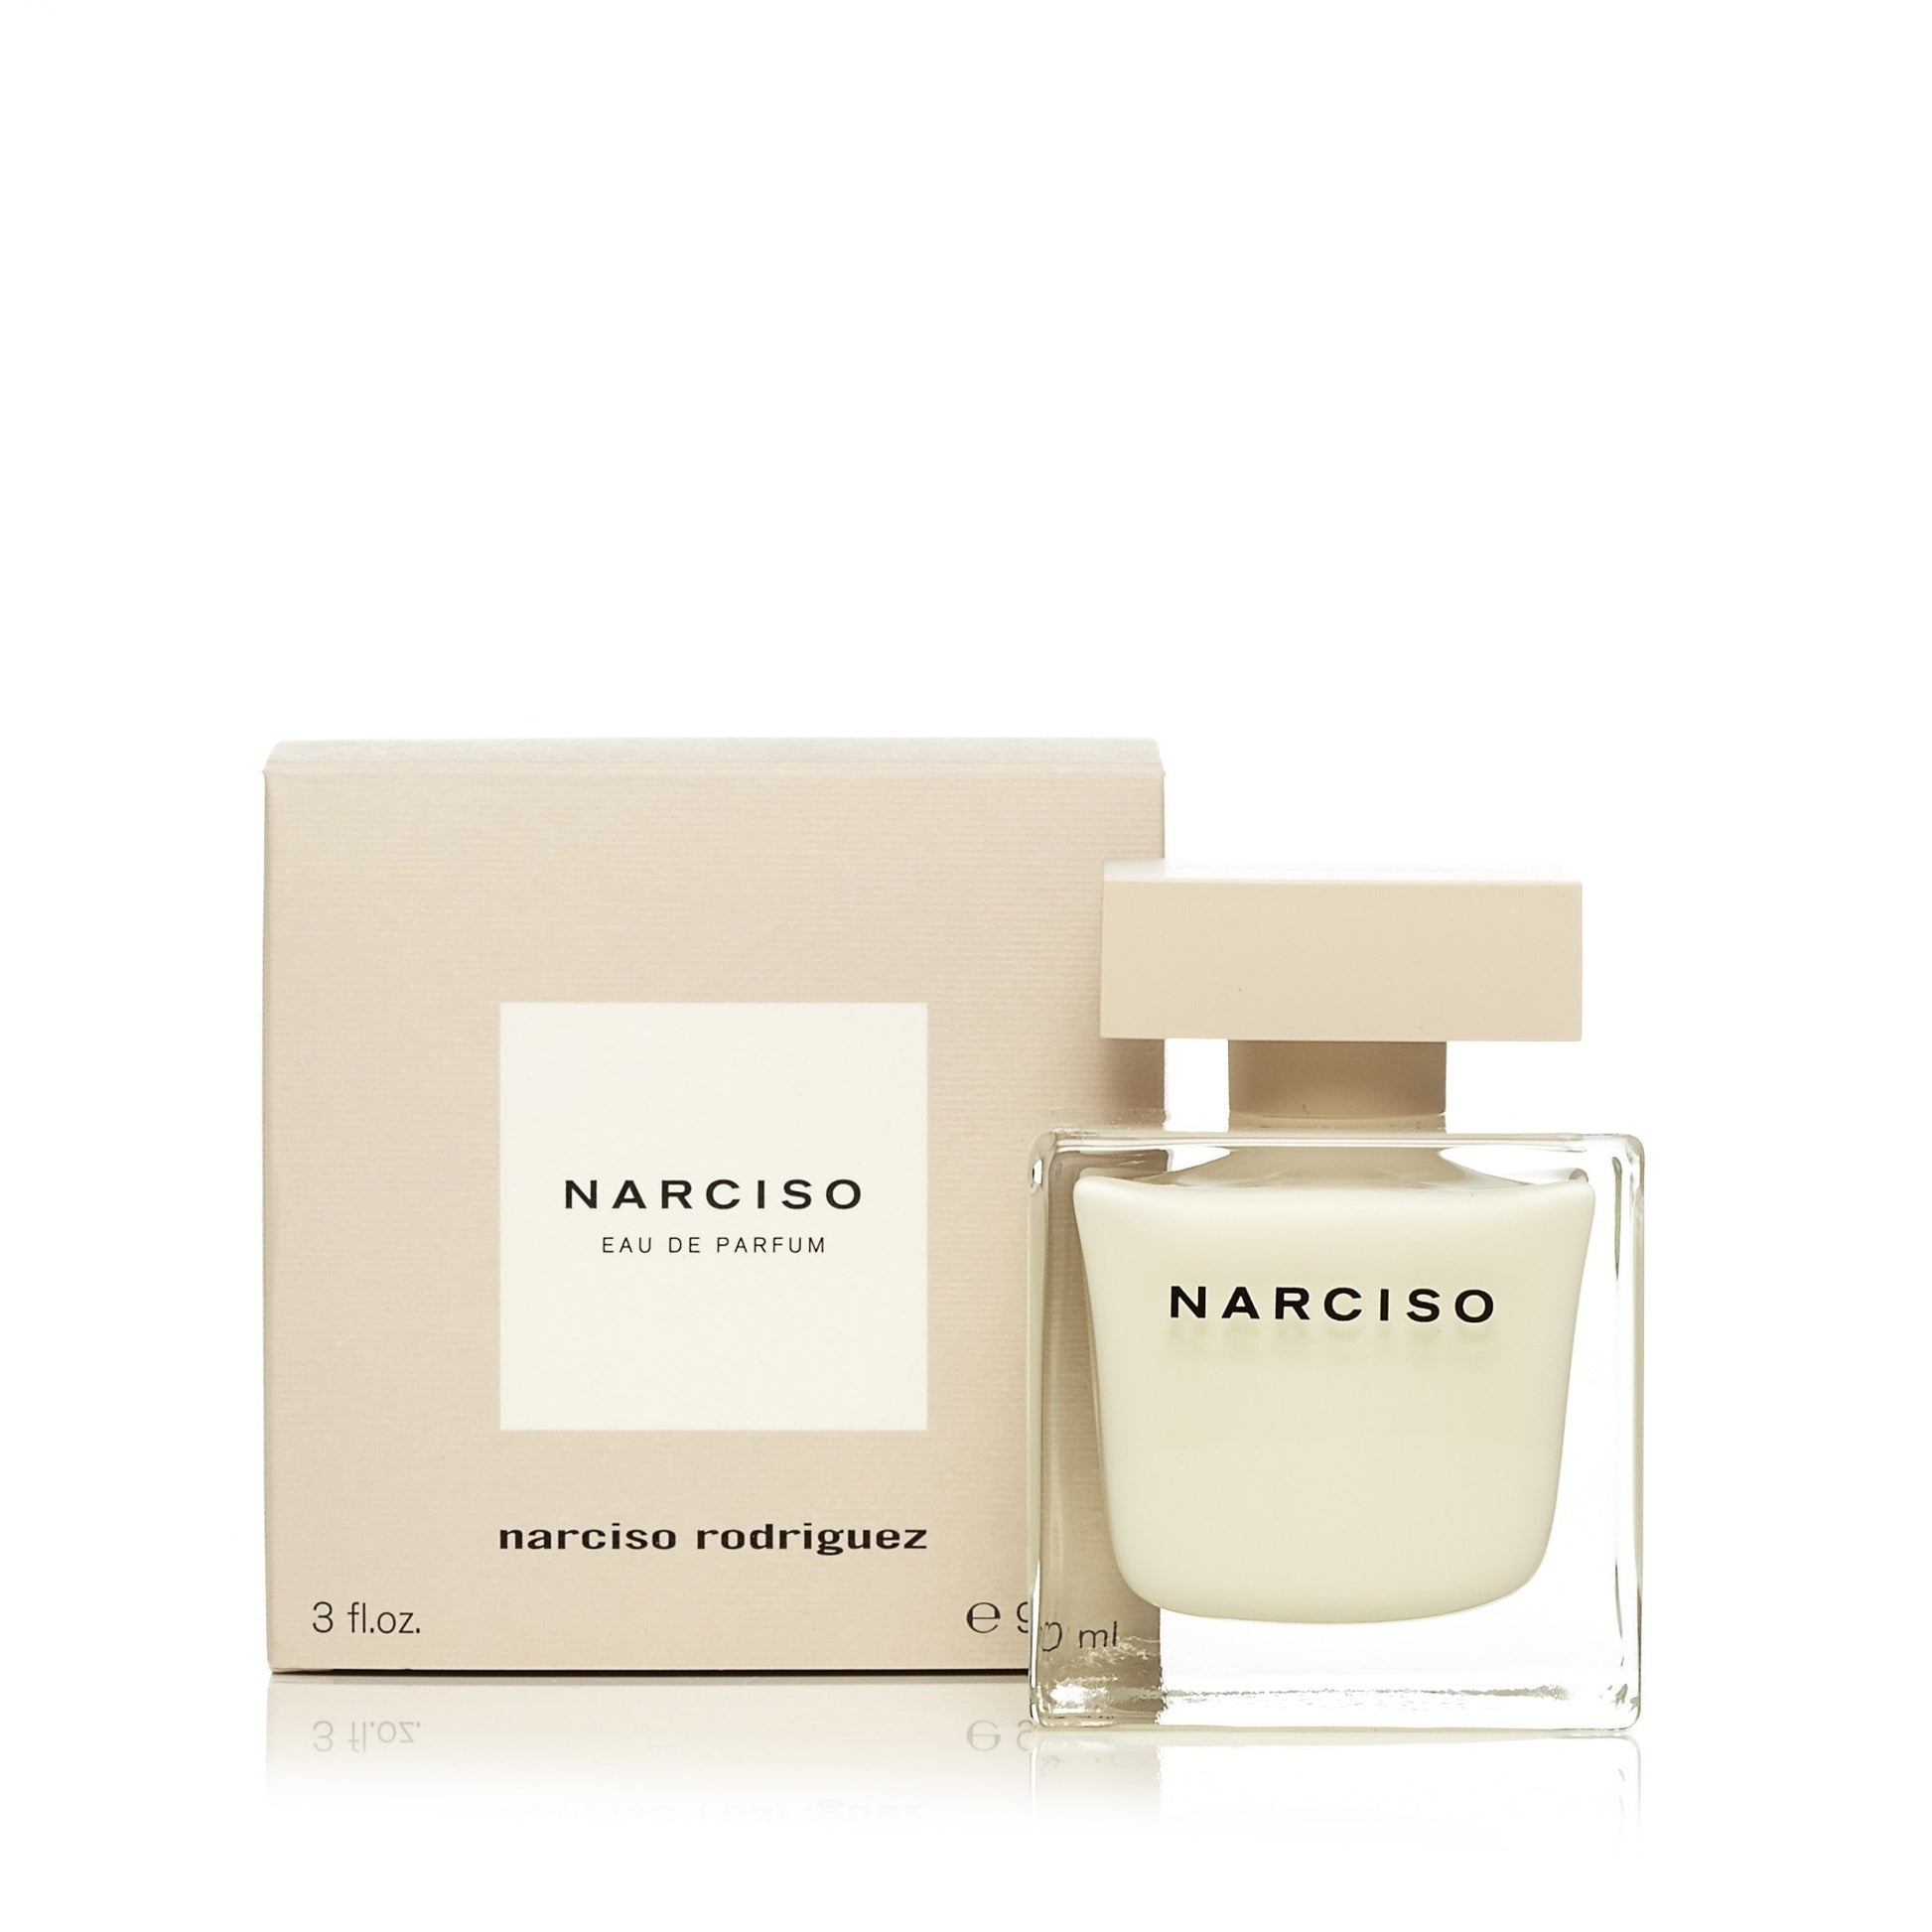 Narciso Eau de Parfum Spray for Women by Narciso Rodriguez 3.0 oz. Click to open in modal